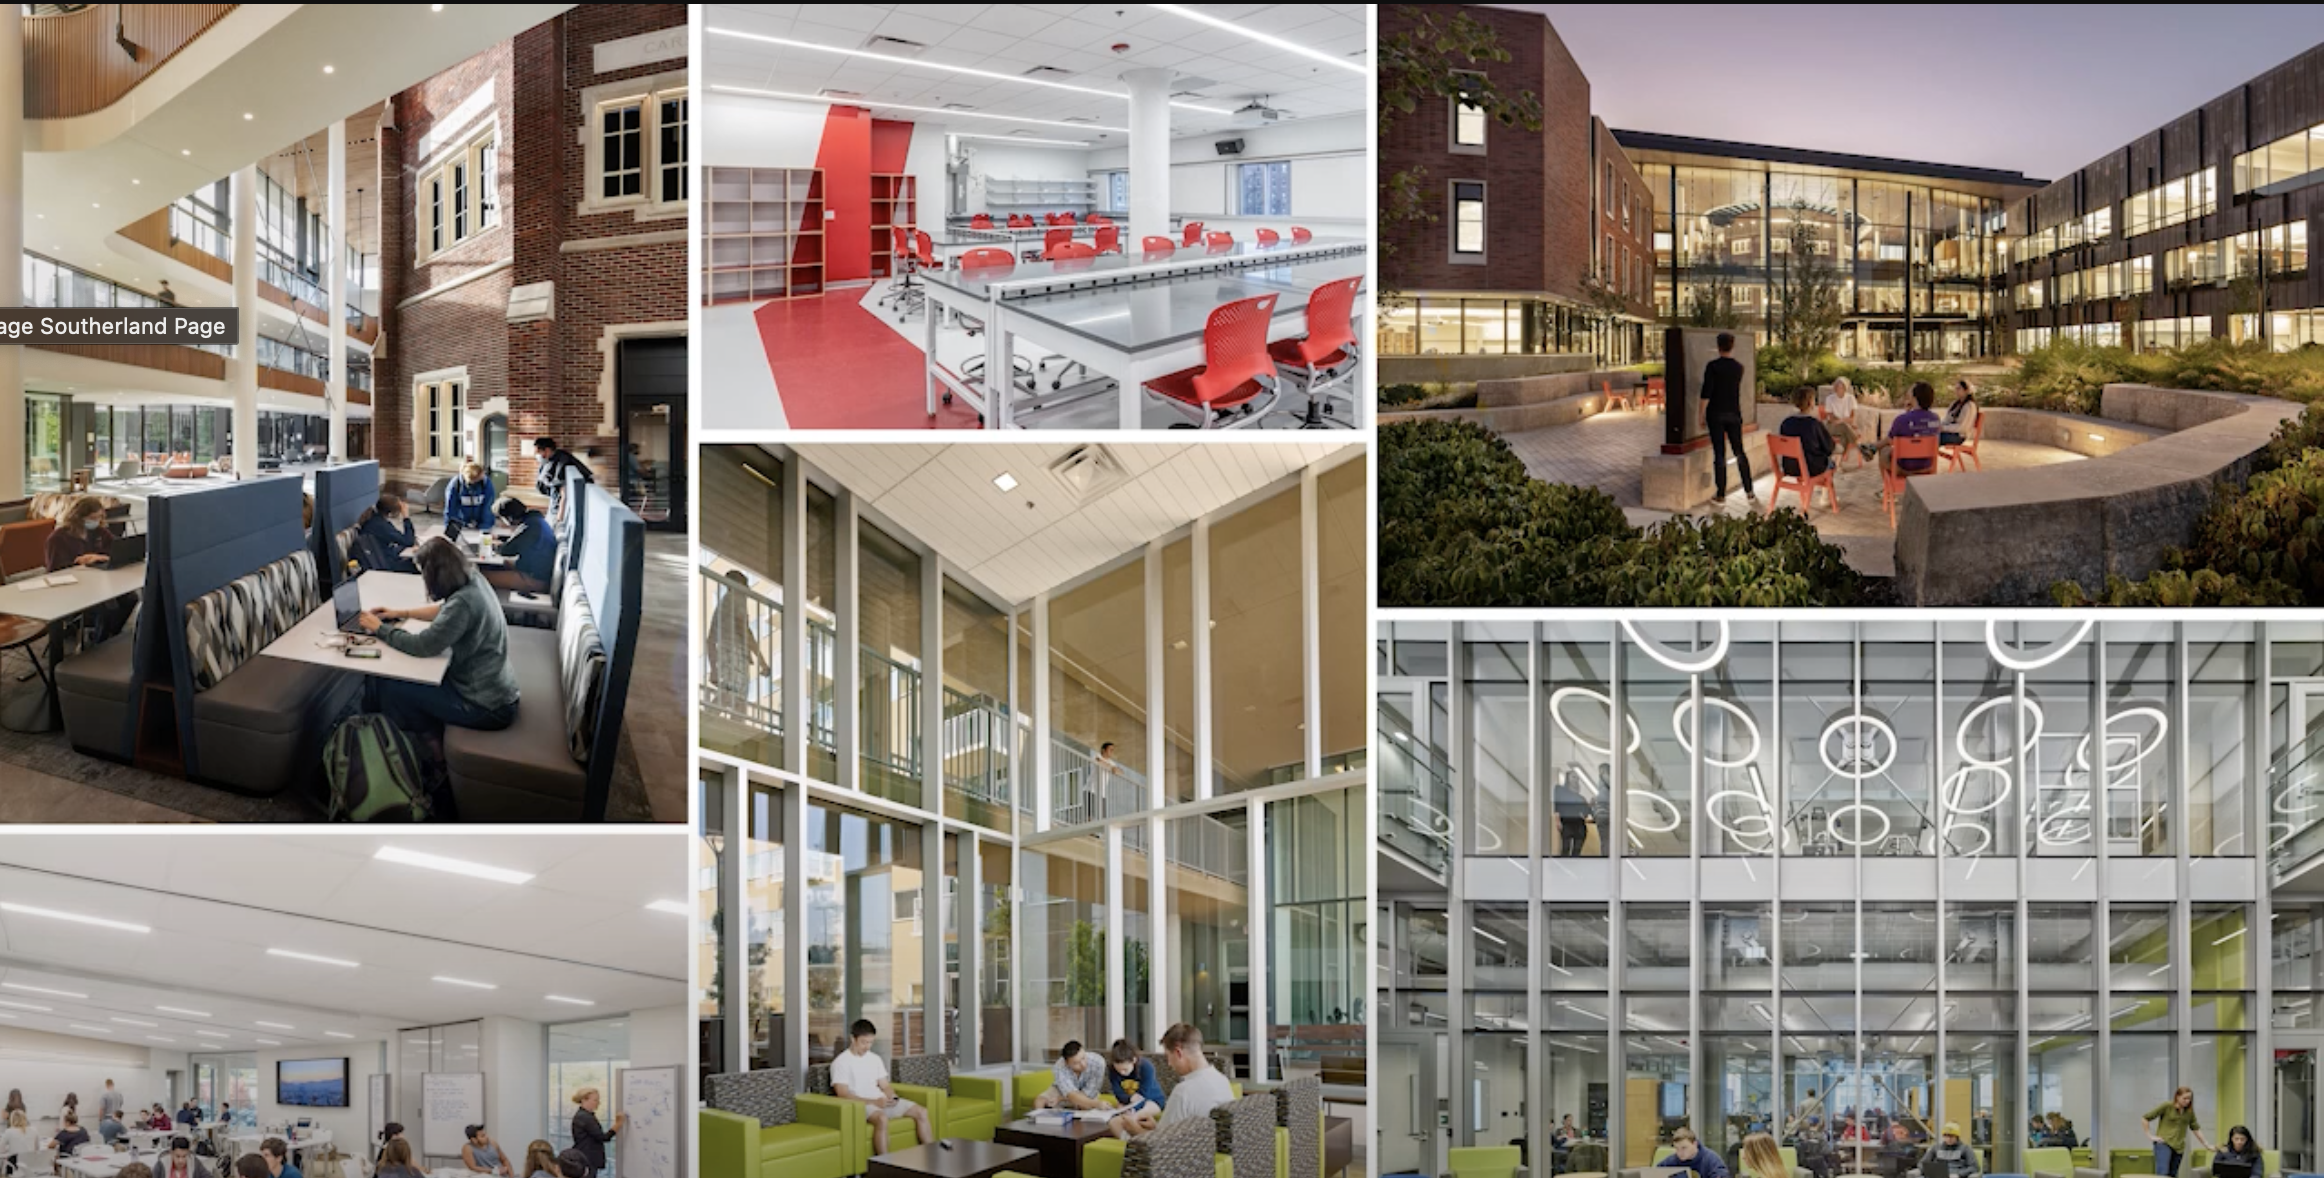 Collage of student spaces